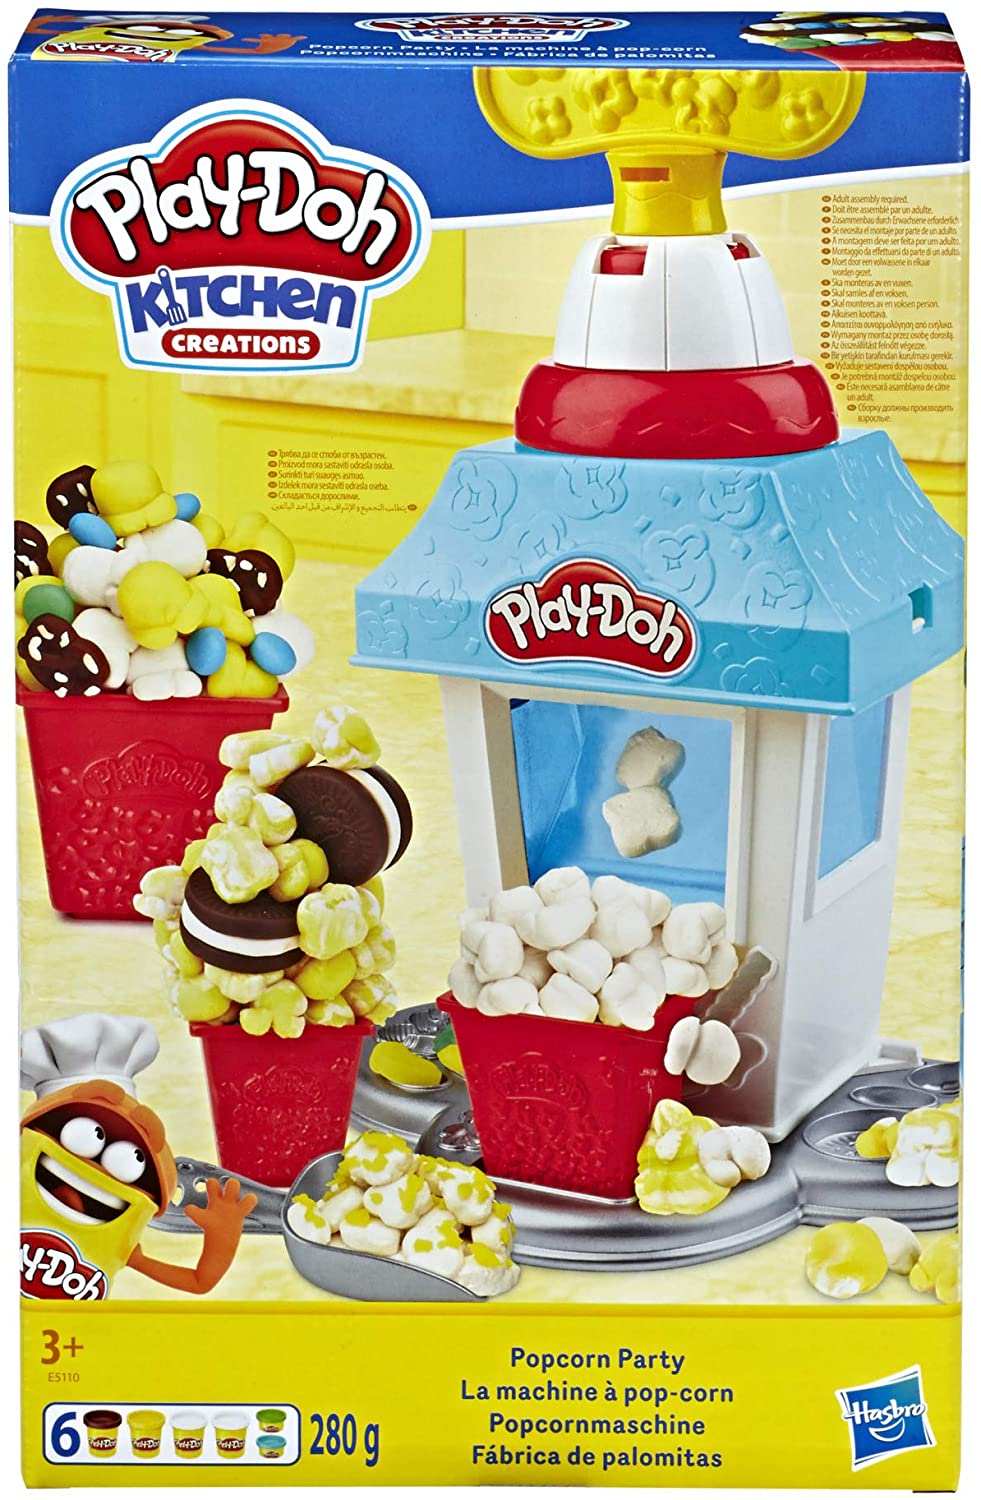 Play-Doh Kitchen Creations Popcorn Party Play Food-set